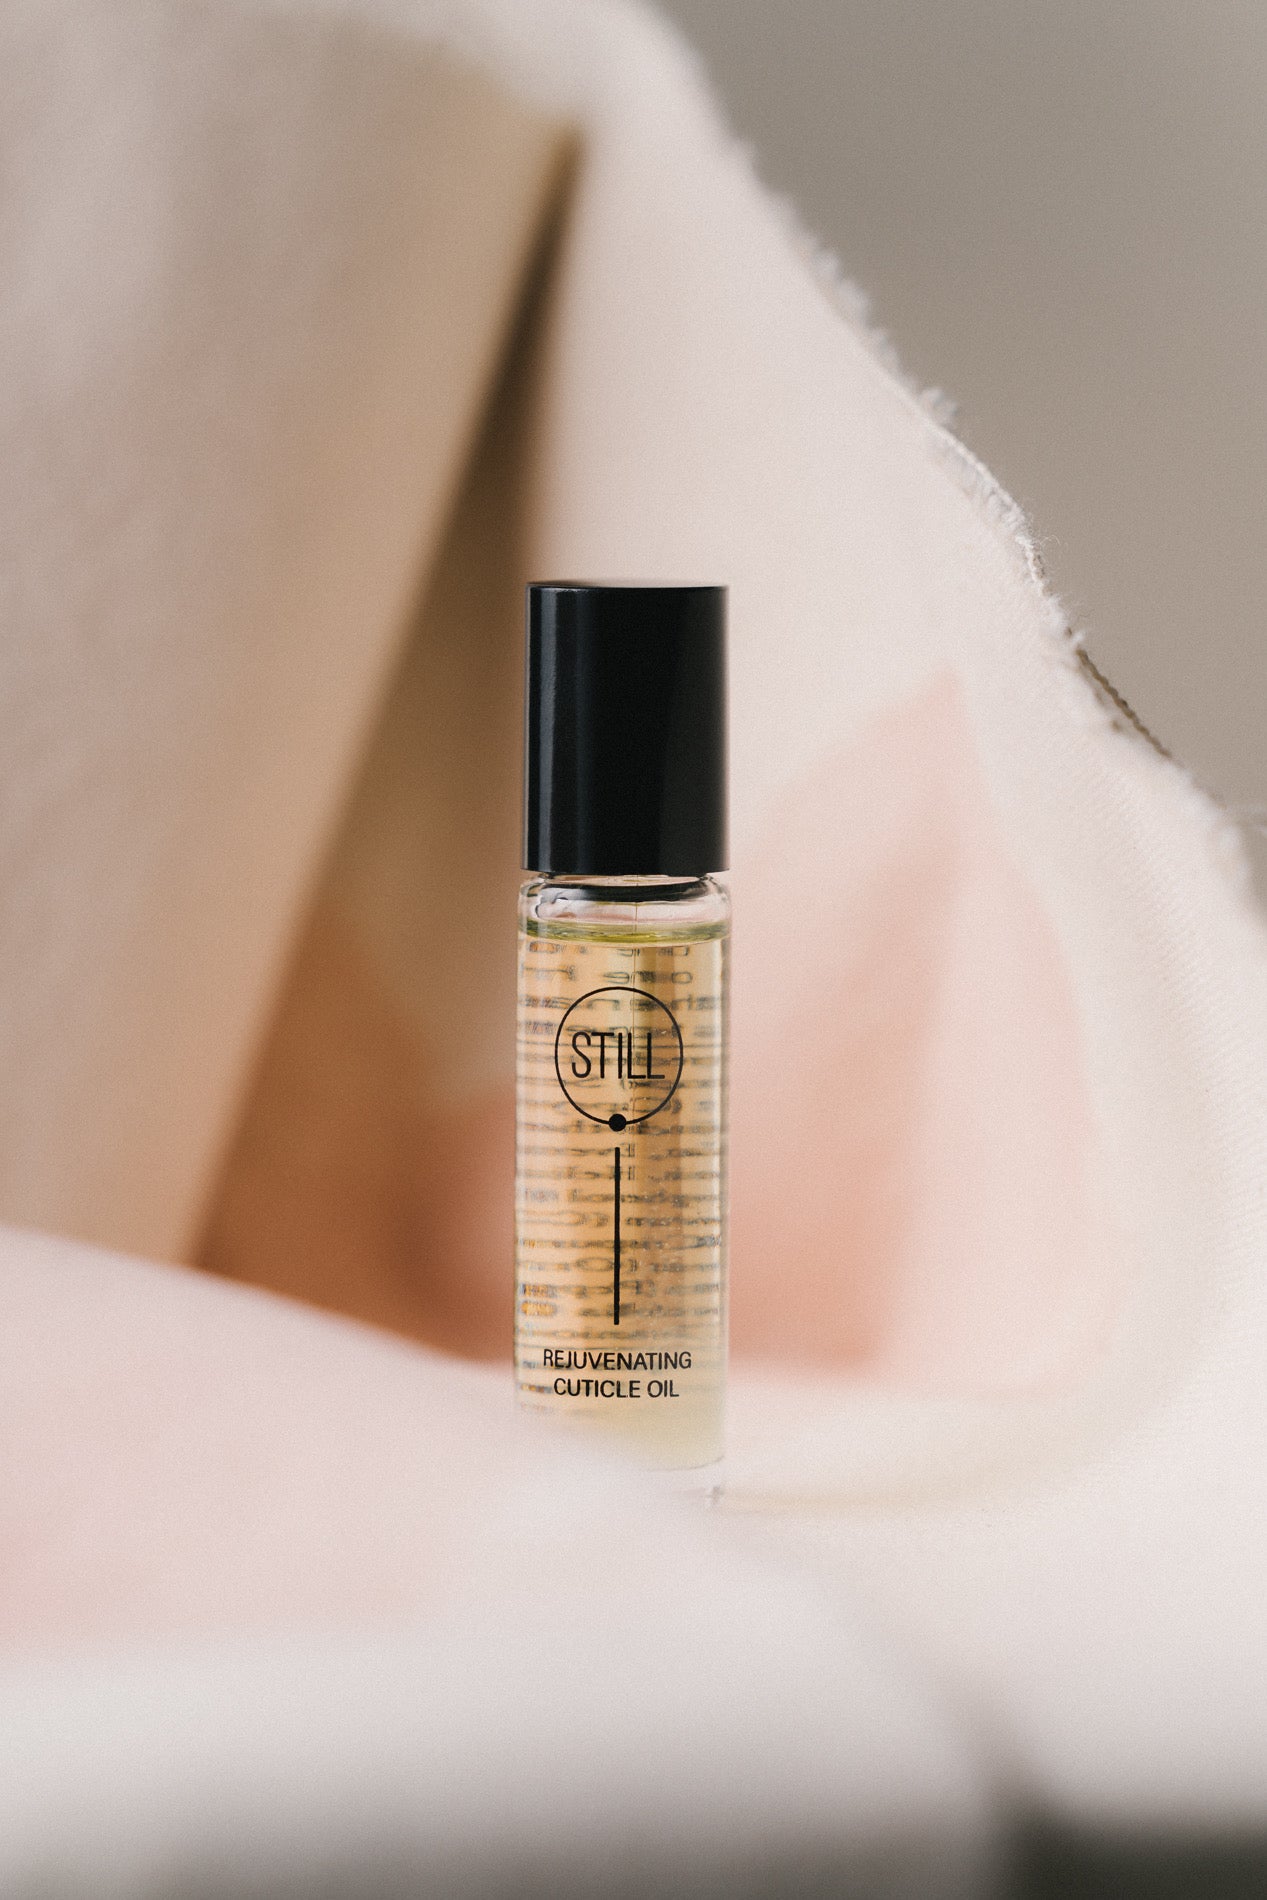 Still Cutical Oil.100% natural, vegan and cruelty free Cuticle Oil - rejuvenating and protecting natural ingredients.